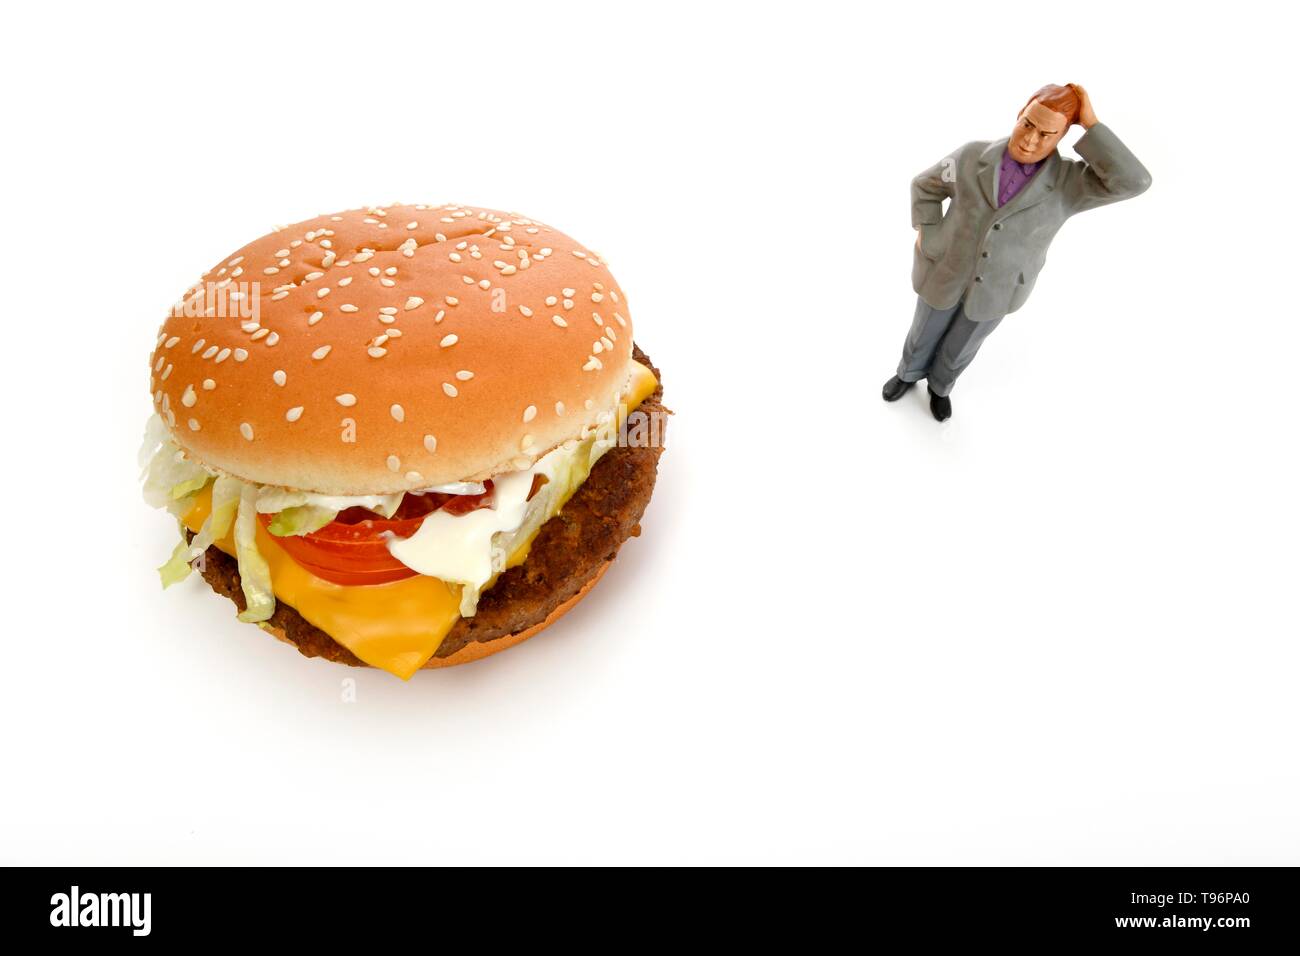 Symbol image overweight, unhealthy diet, thoughtful figure in front of Cheeseburger, Germany Stock Photo